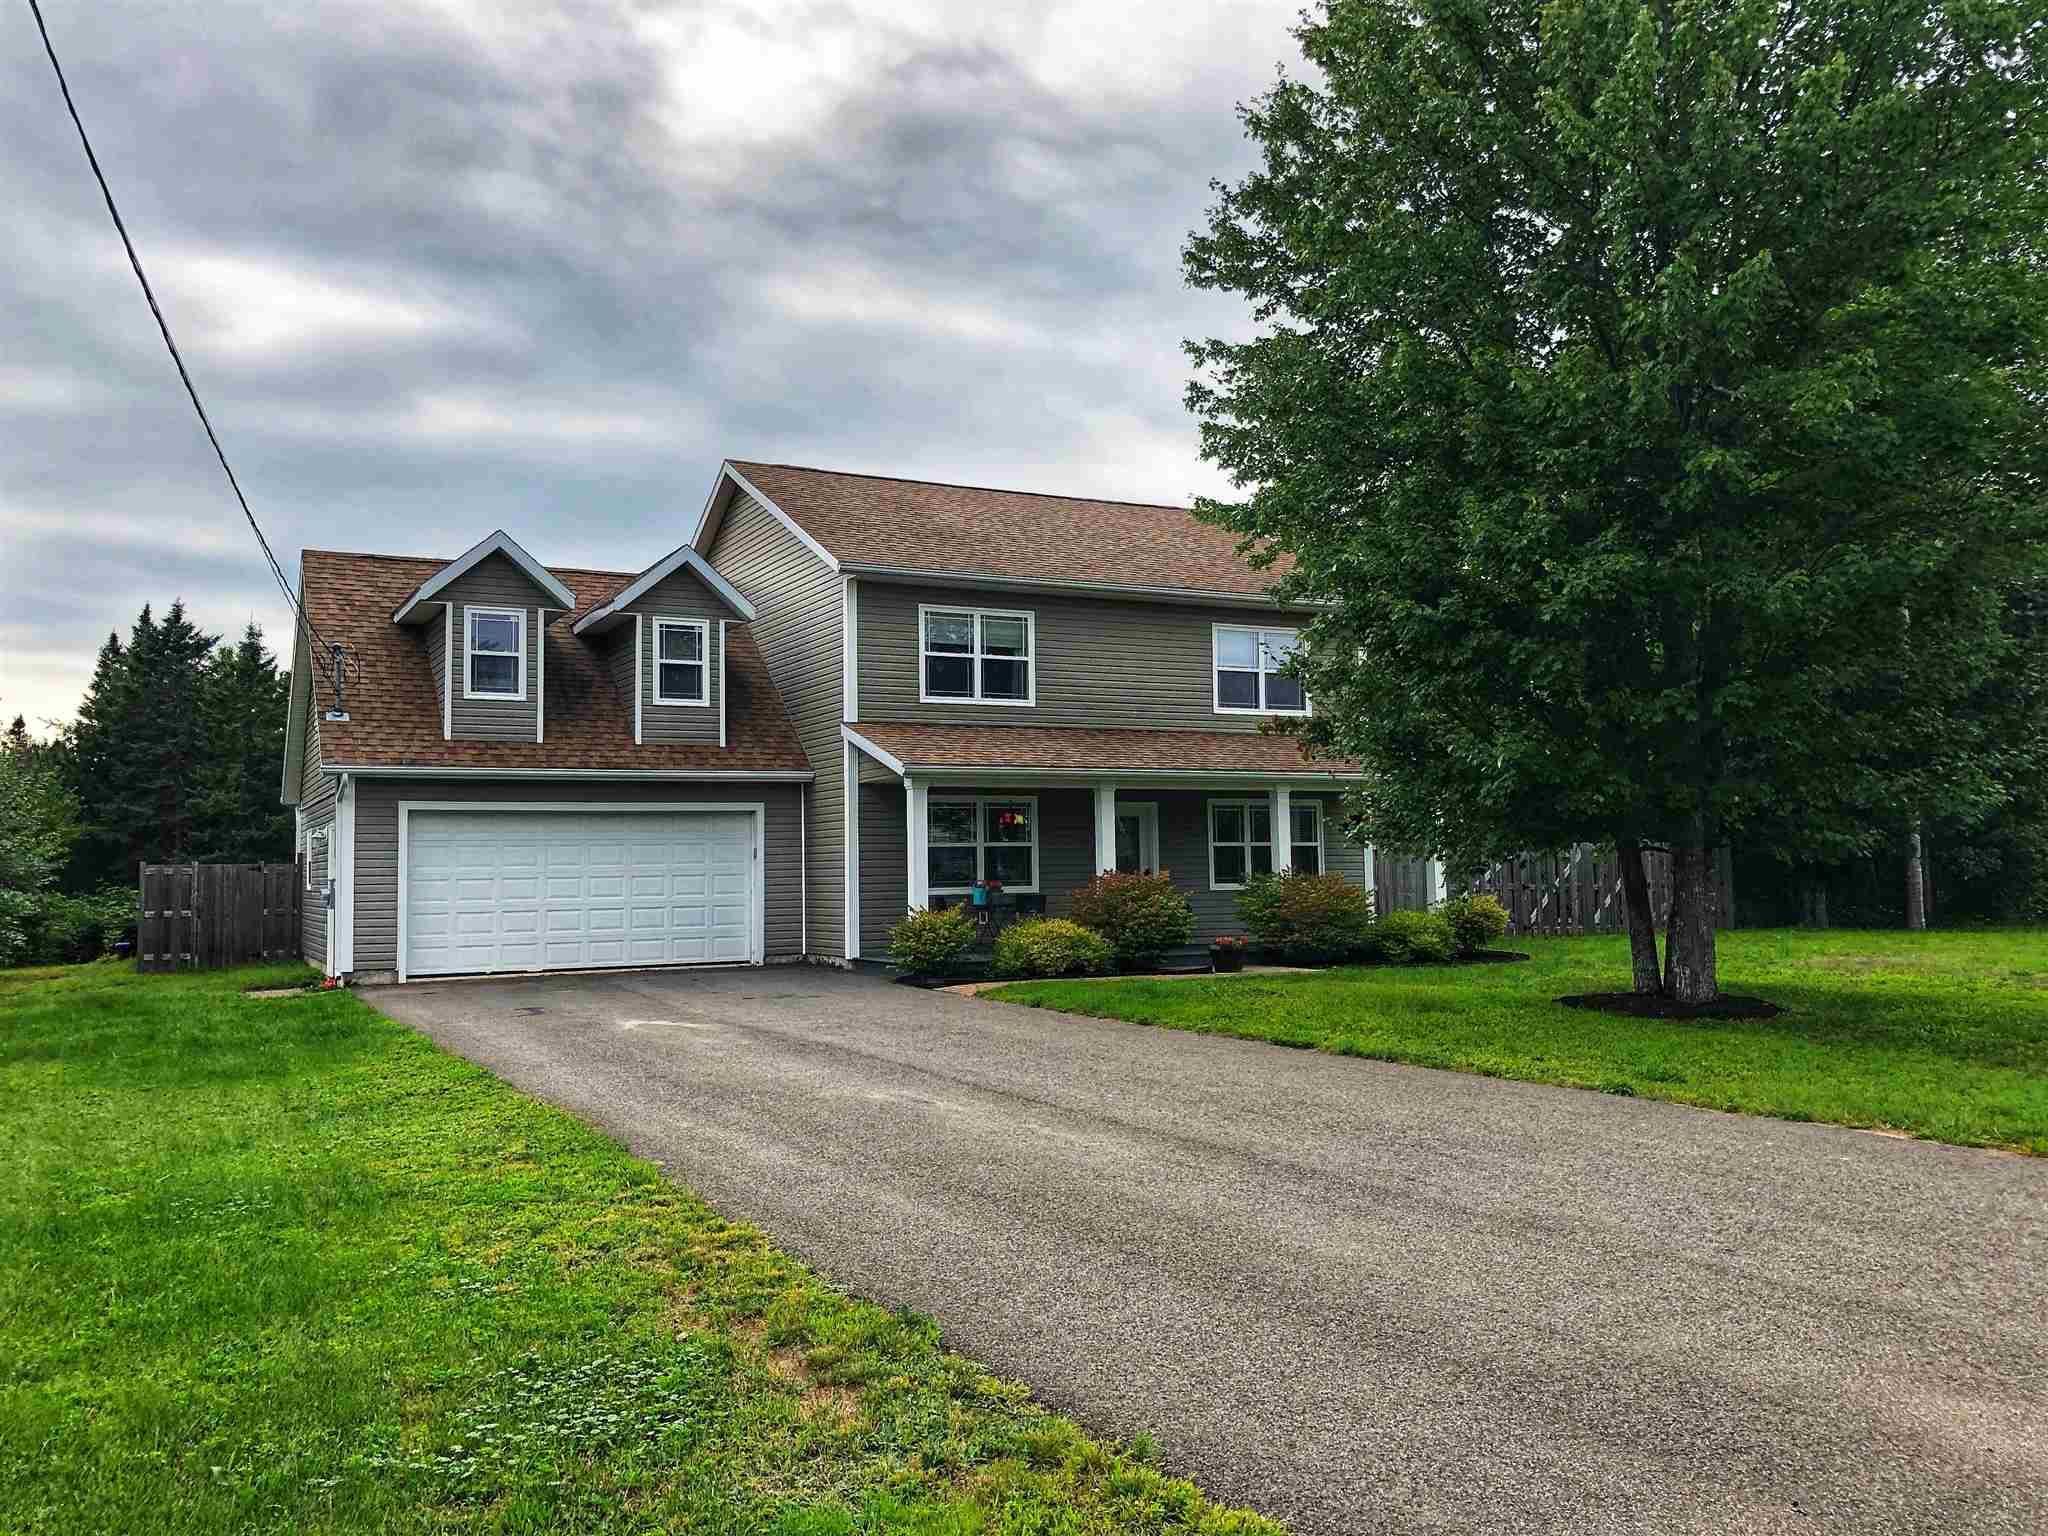 Main Photo: 197 Belle Drive in Meadowvale: 400-Annapolis County Residential for sale (Annapolis Valley)  : MLS®# 202120898